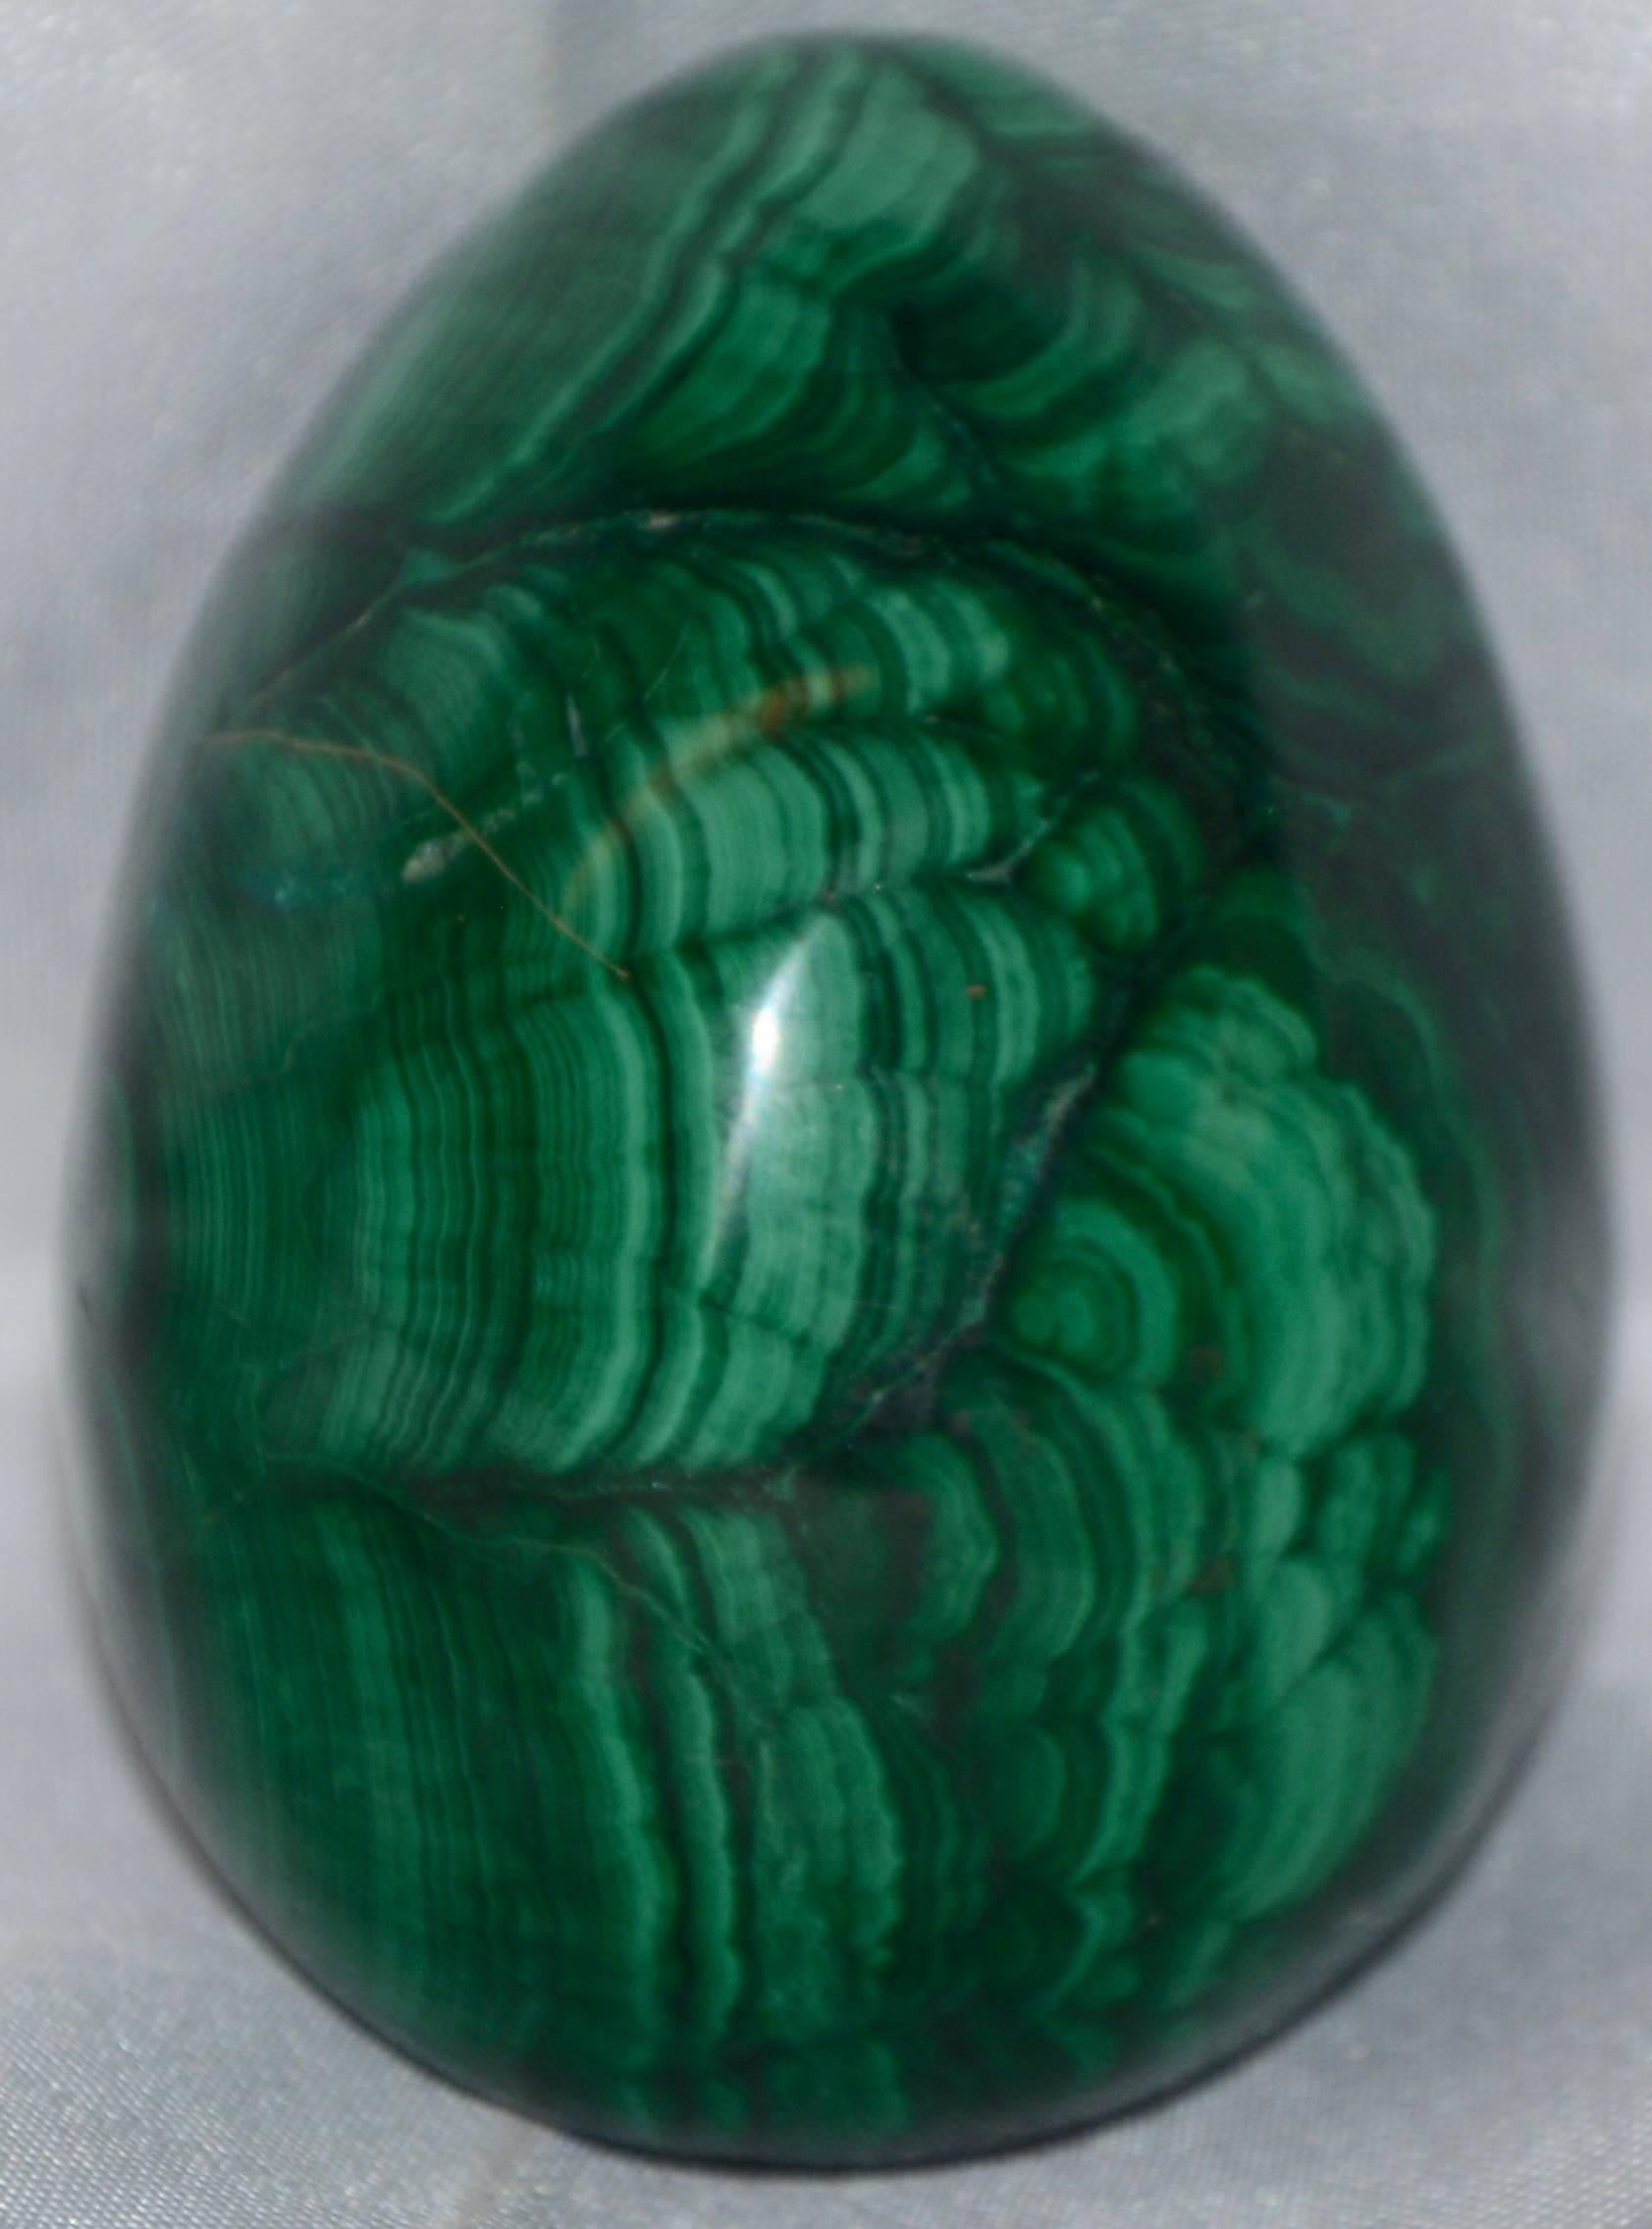 Beautiful veining in shades of green form this Malachite egg. The smoothness of the stone is amazing!